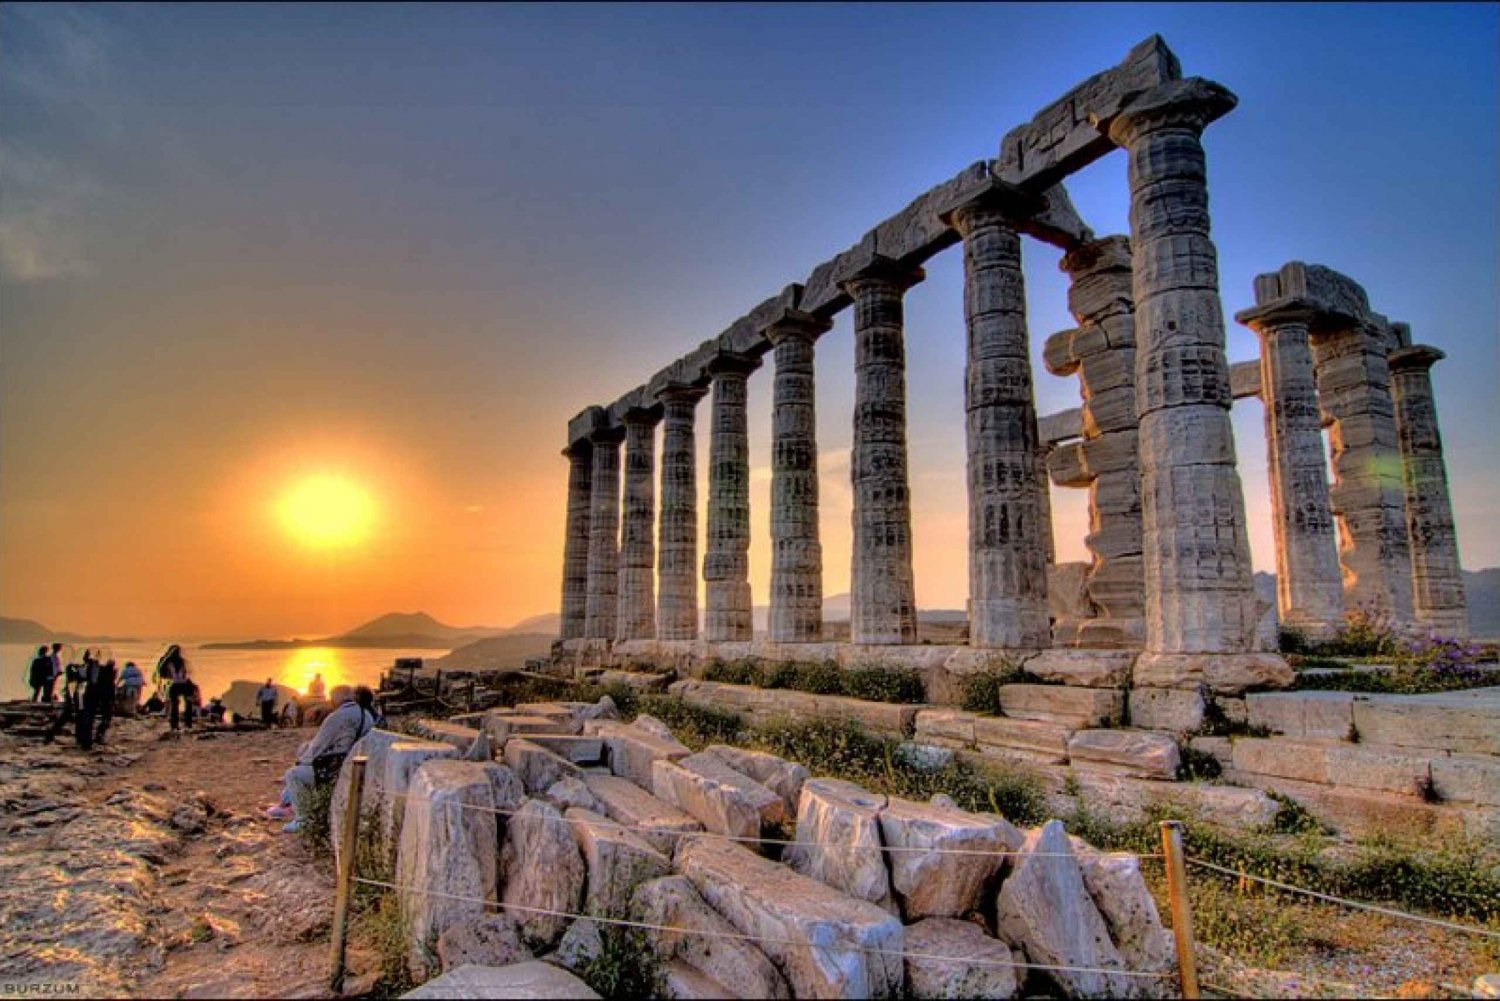 Cape Sounion Private Half-Day Tour from Athens